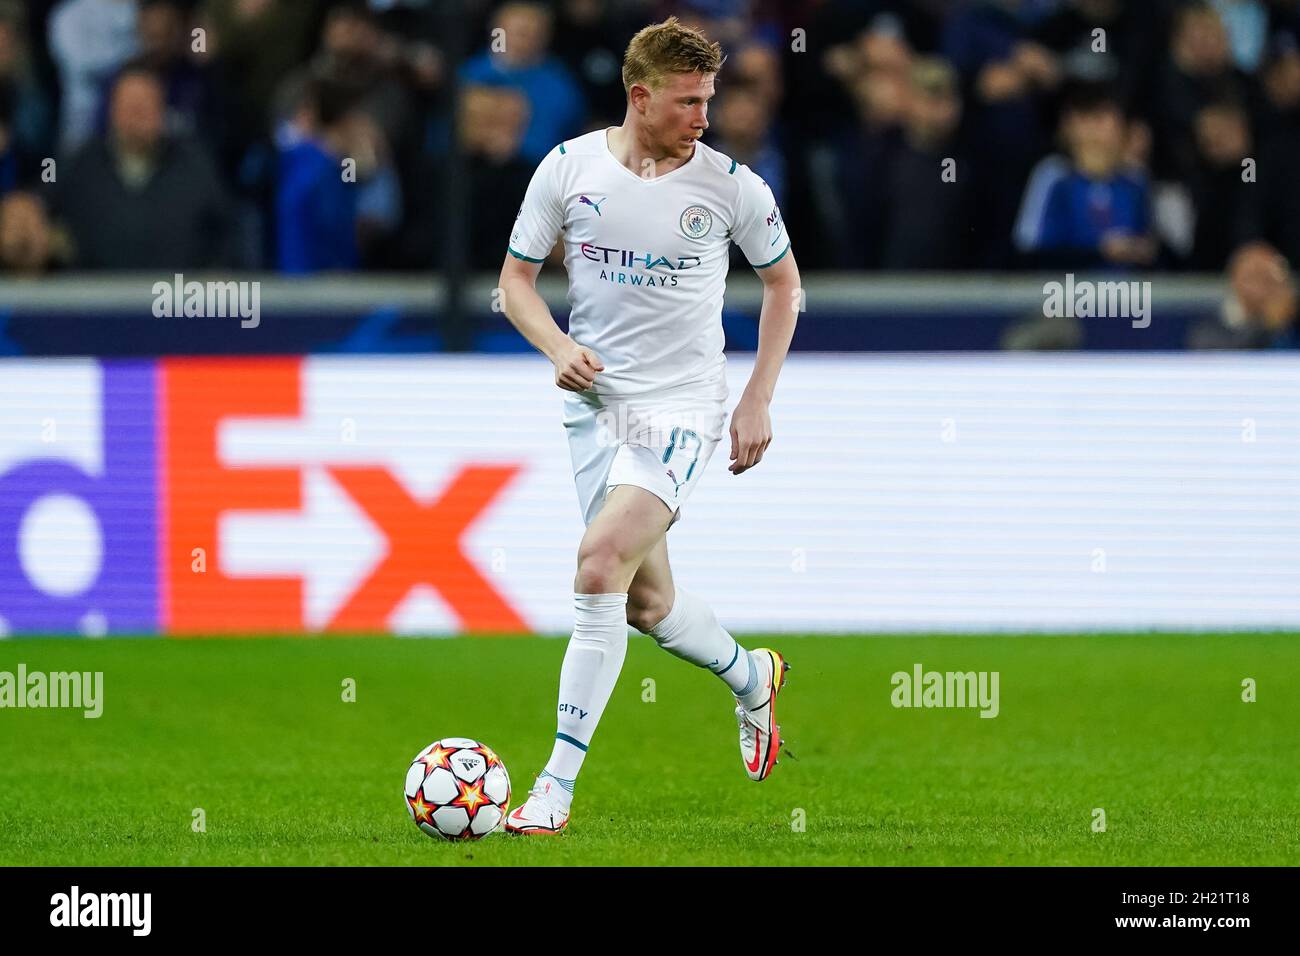 BRUGGE, BELGIUM - OCTOBER 19: Kevin De Bruyne of Manchester City during the  Group A - UEFA Champions League match between Club Brugge KV and Manchester  City at Jan Breydelstadion on October